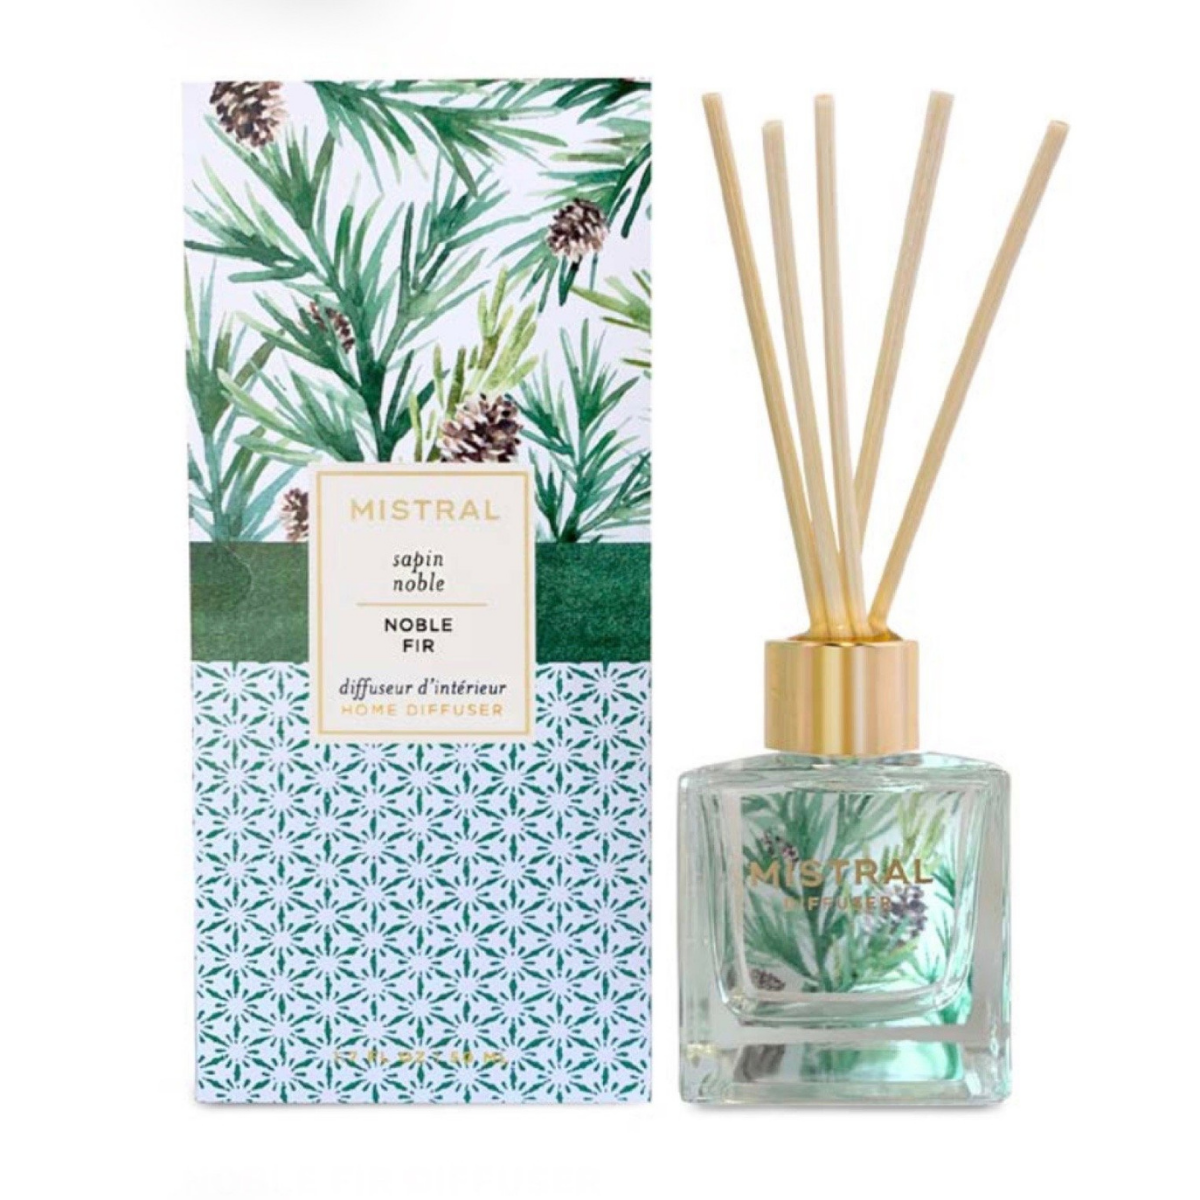 Primary image of Noble Fir Reed Diffuser